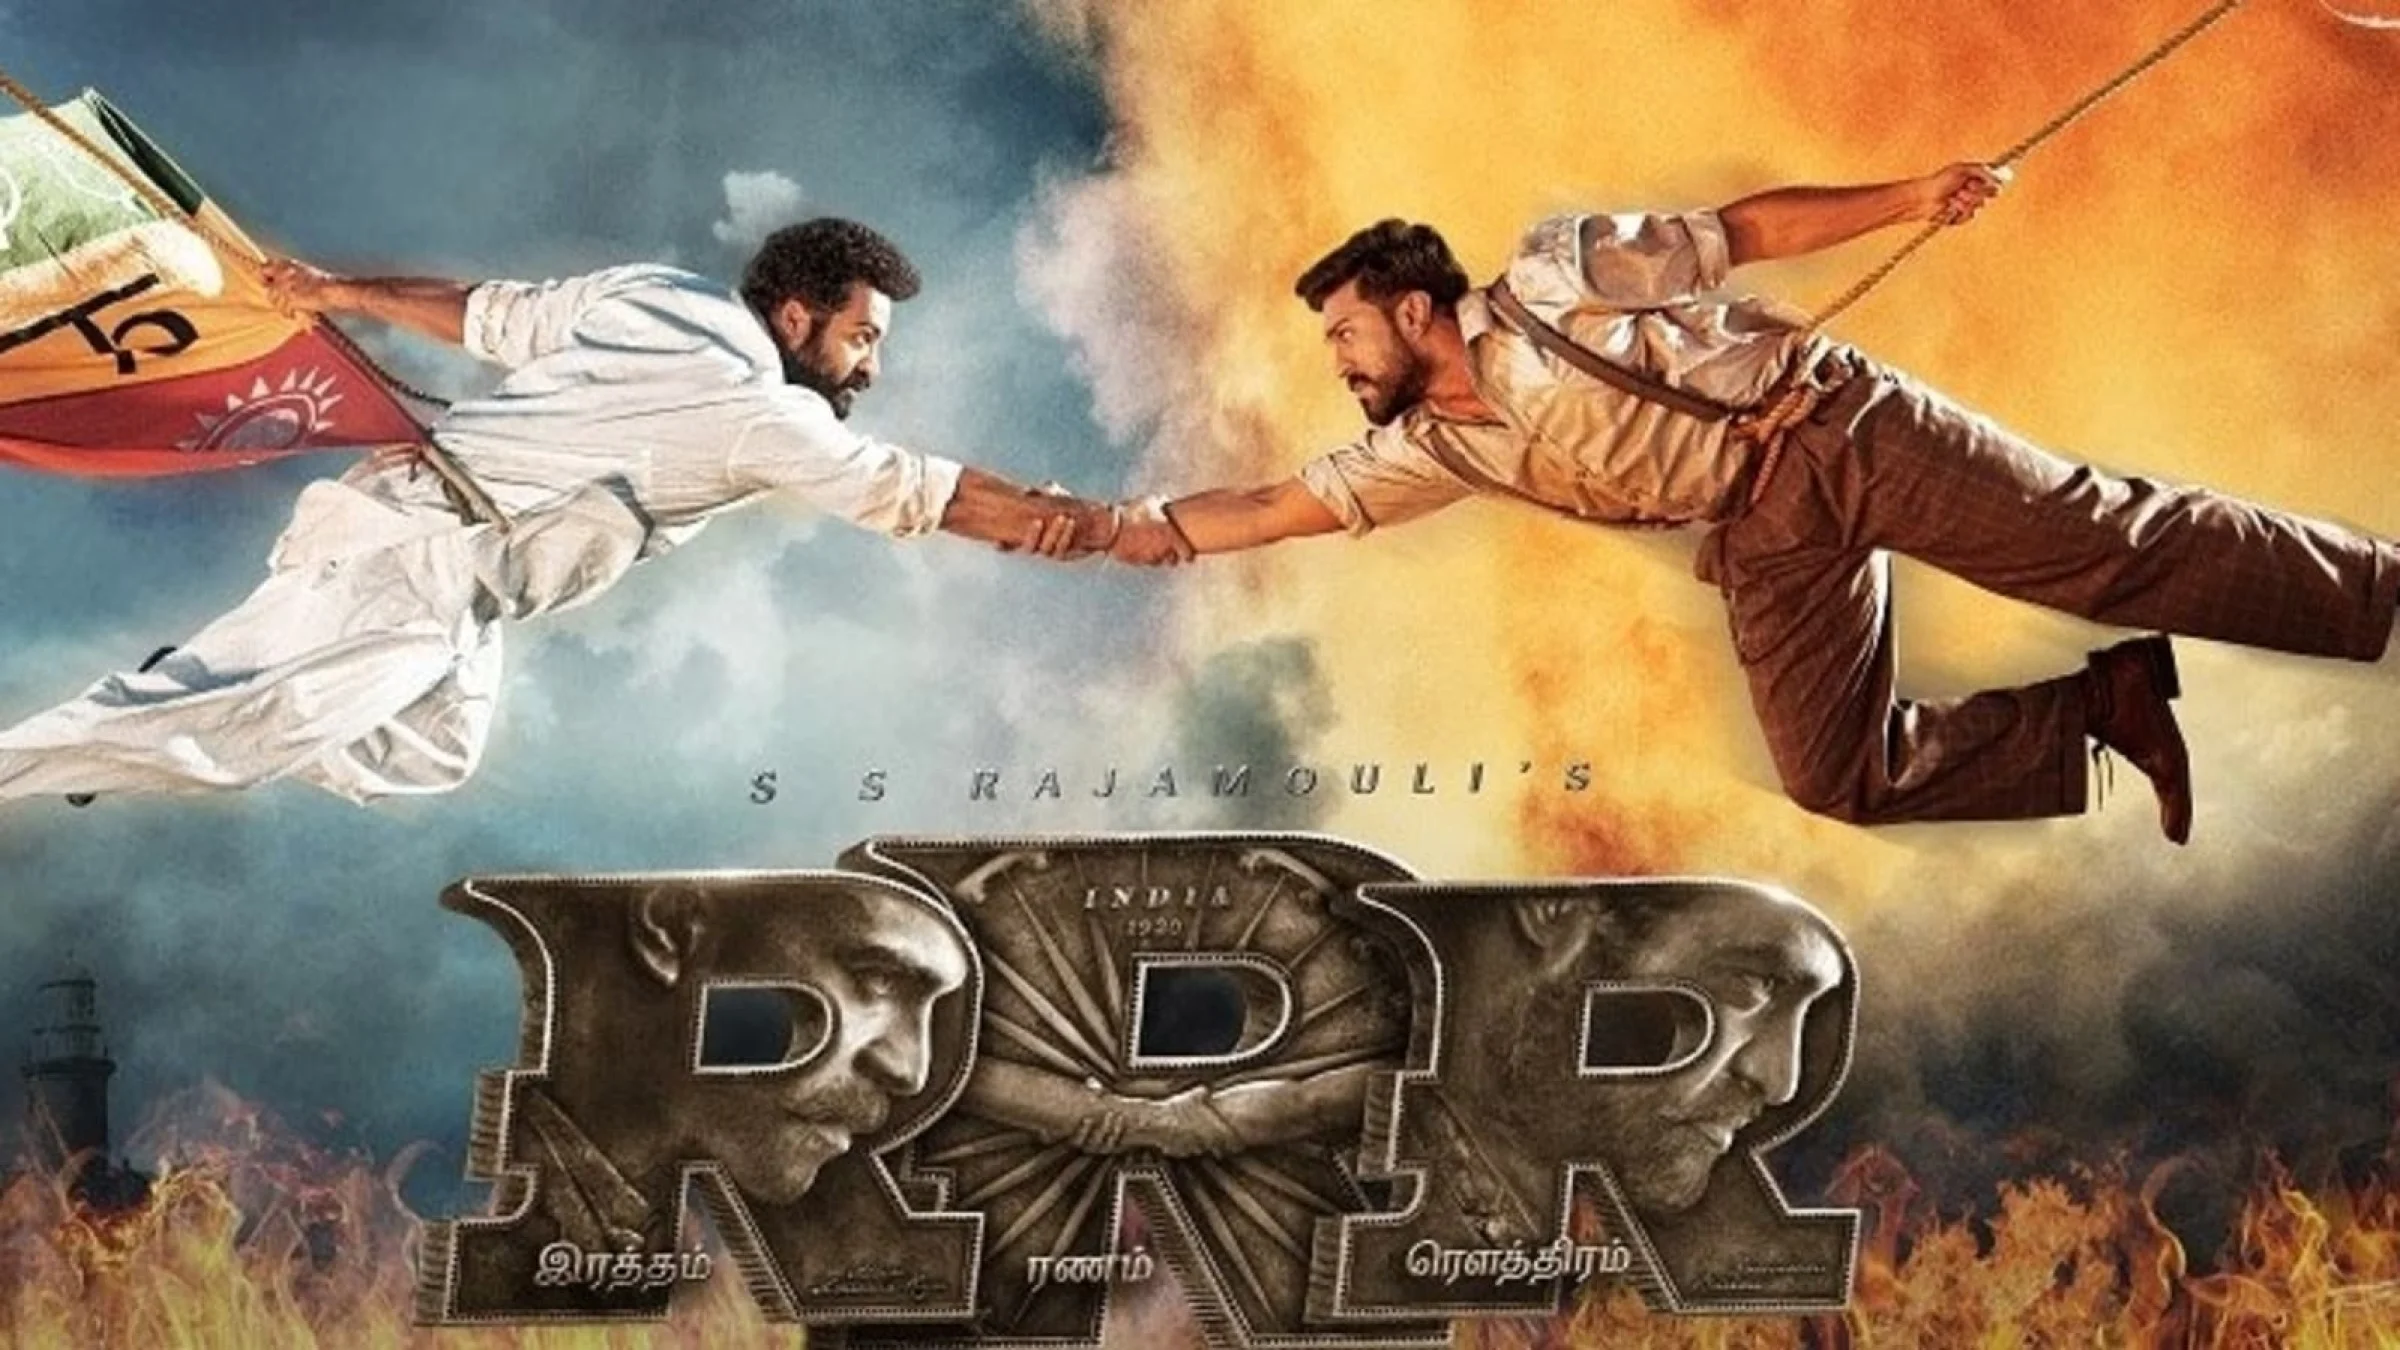 Rrr movie commented as gay story by resul pookutty getting viral on social media